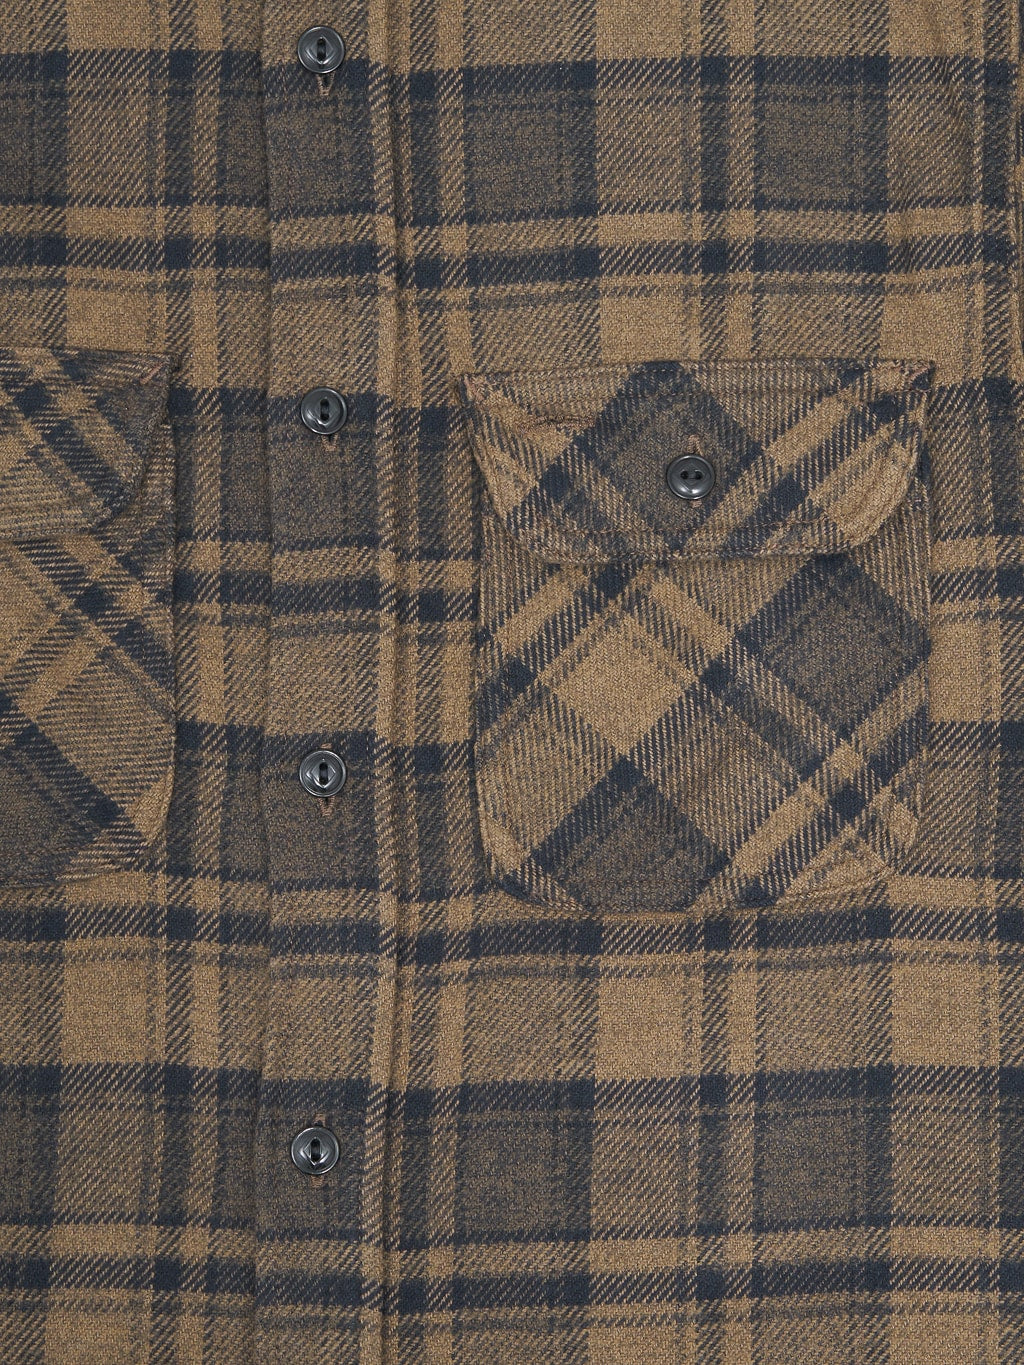 Fob Factory F3497 Nel Check Work flannel Shirt Brown pockets closeup